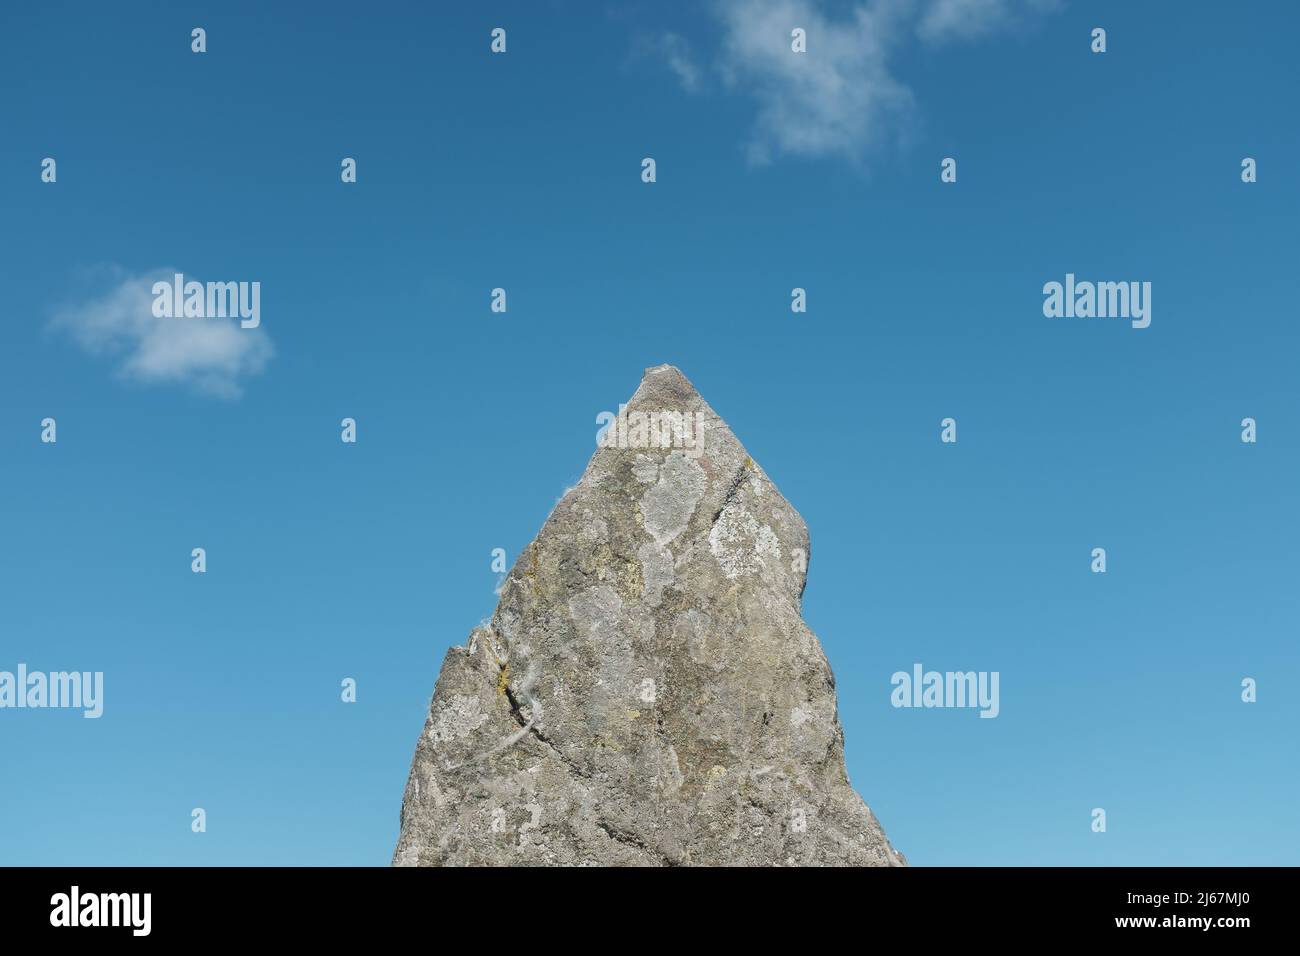 Minimalist Image Of An Arrow Shaped Rock Pointing Into A Vibrant Blue Sky, With Copy Space Stock Photo